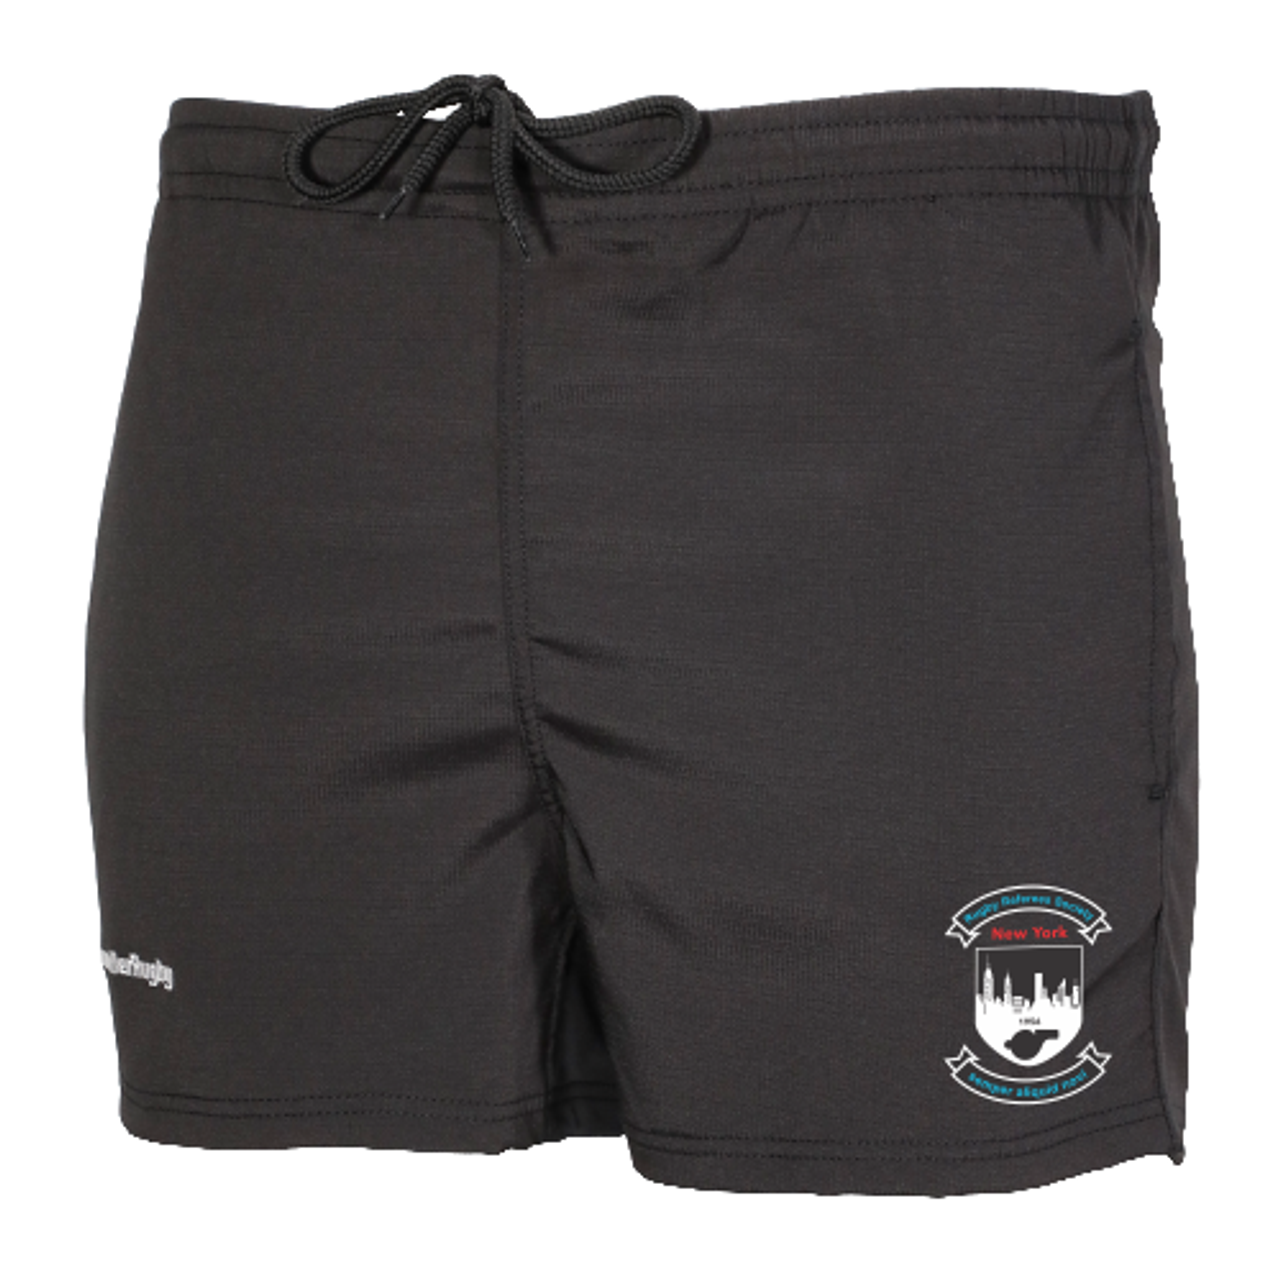 RRSNY SRS Pocketed Performance Rugby Shorts